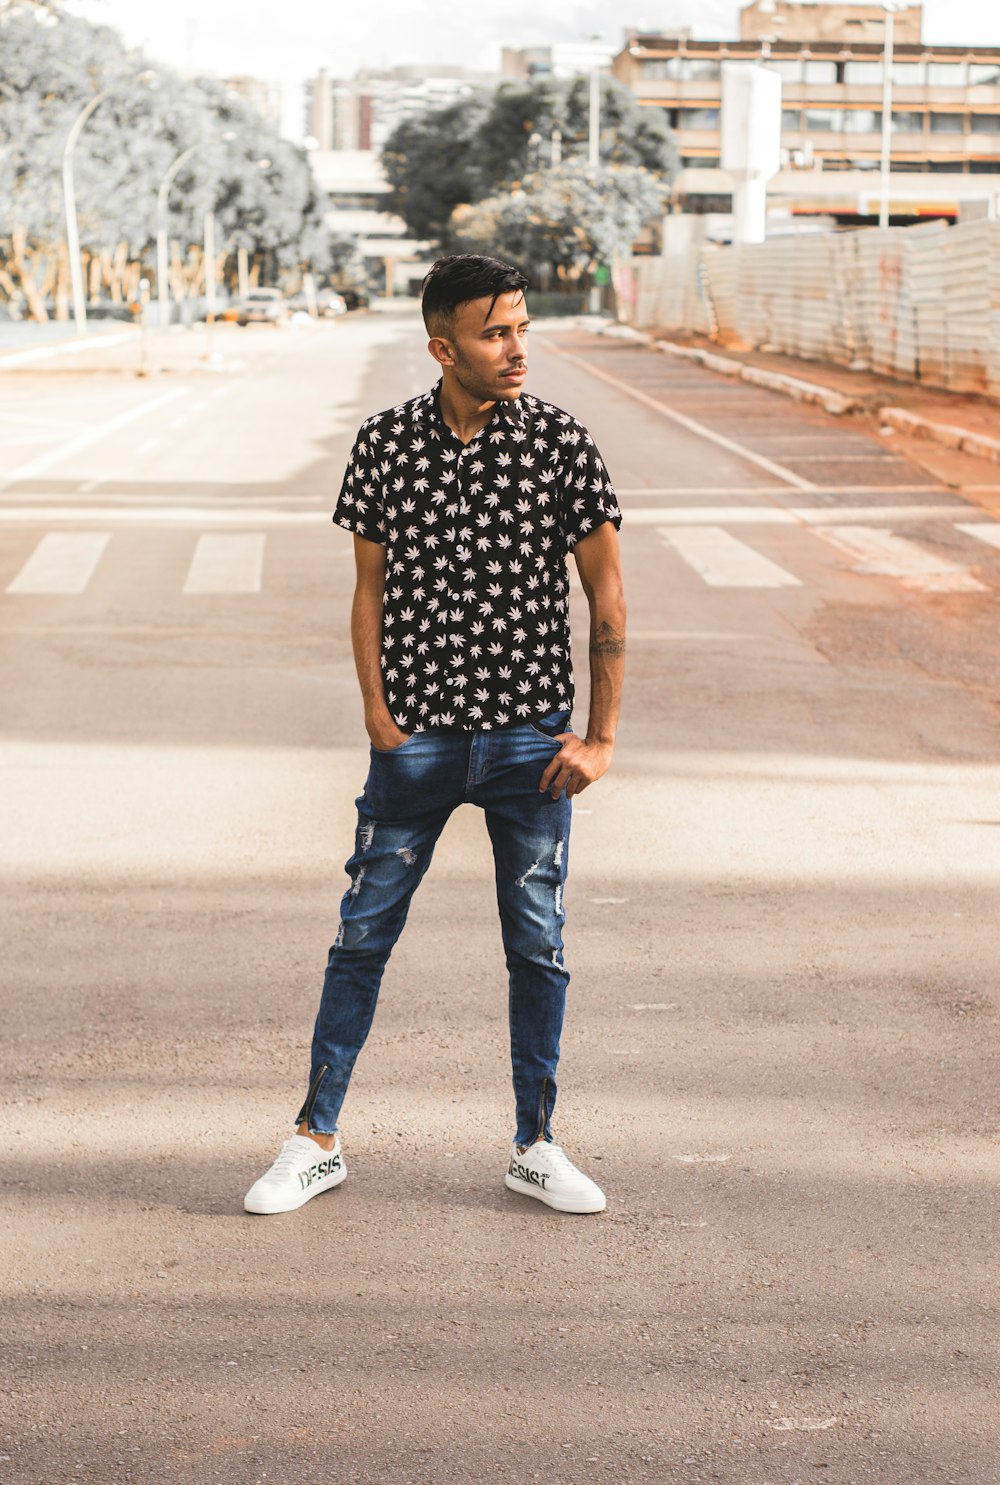 man in black and white polka dot shirt and blue denim jeans standing on road during